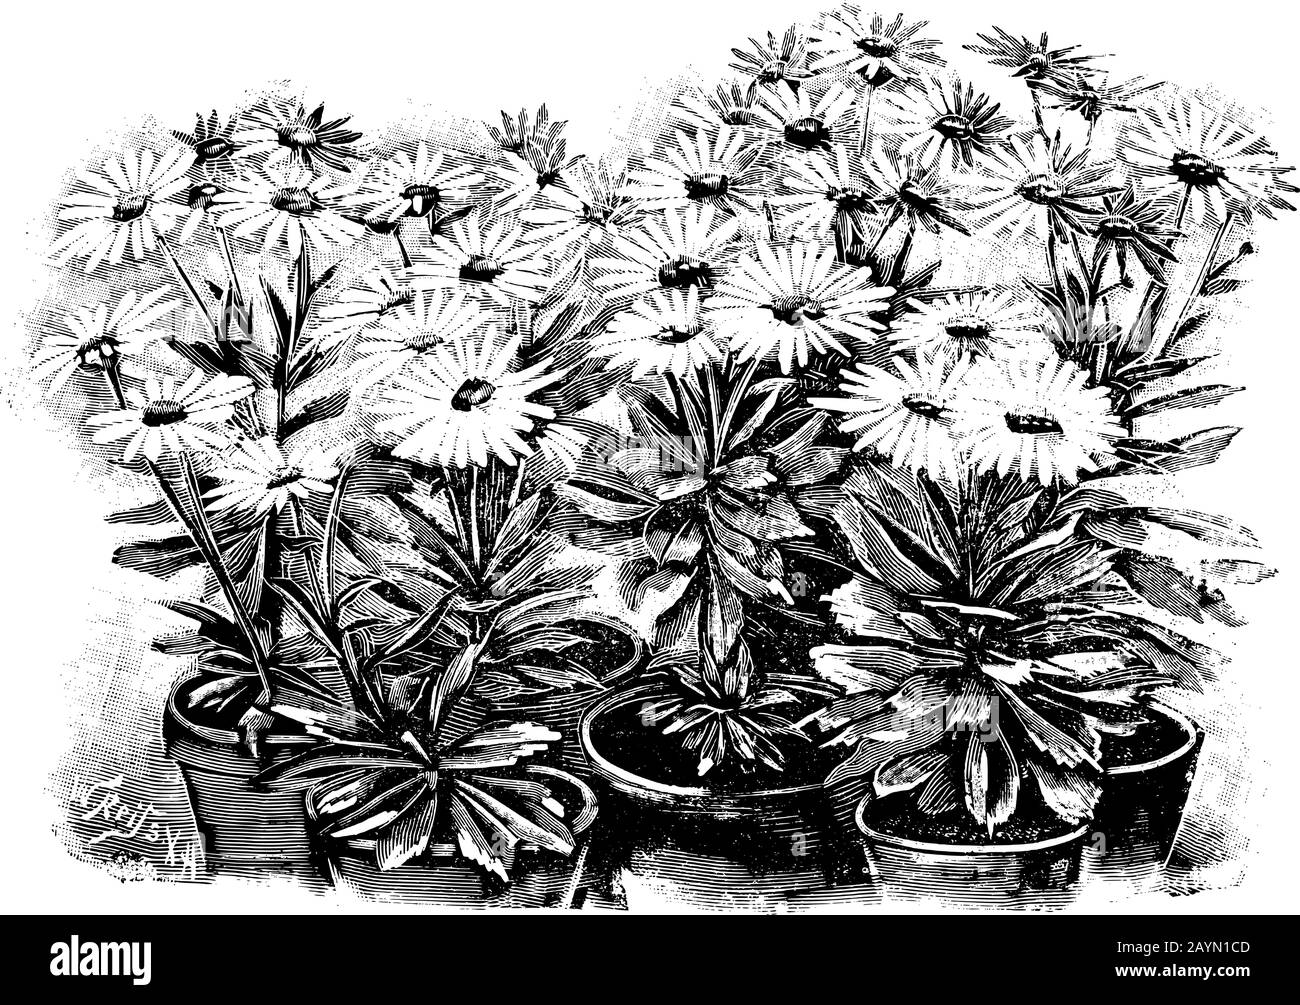 Antique vintage line art vector illustration, engraving or drawing of several blooming Nipponanthemum Nipponicum or nippon daisy plants in pots. Stock Vector